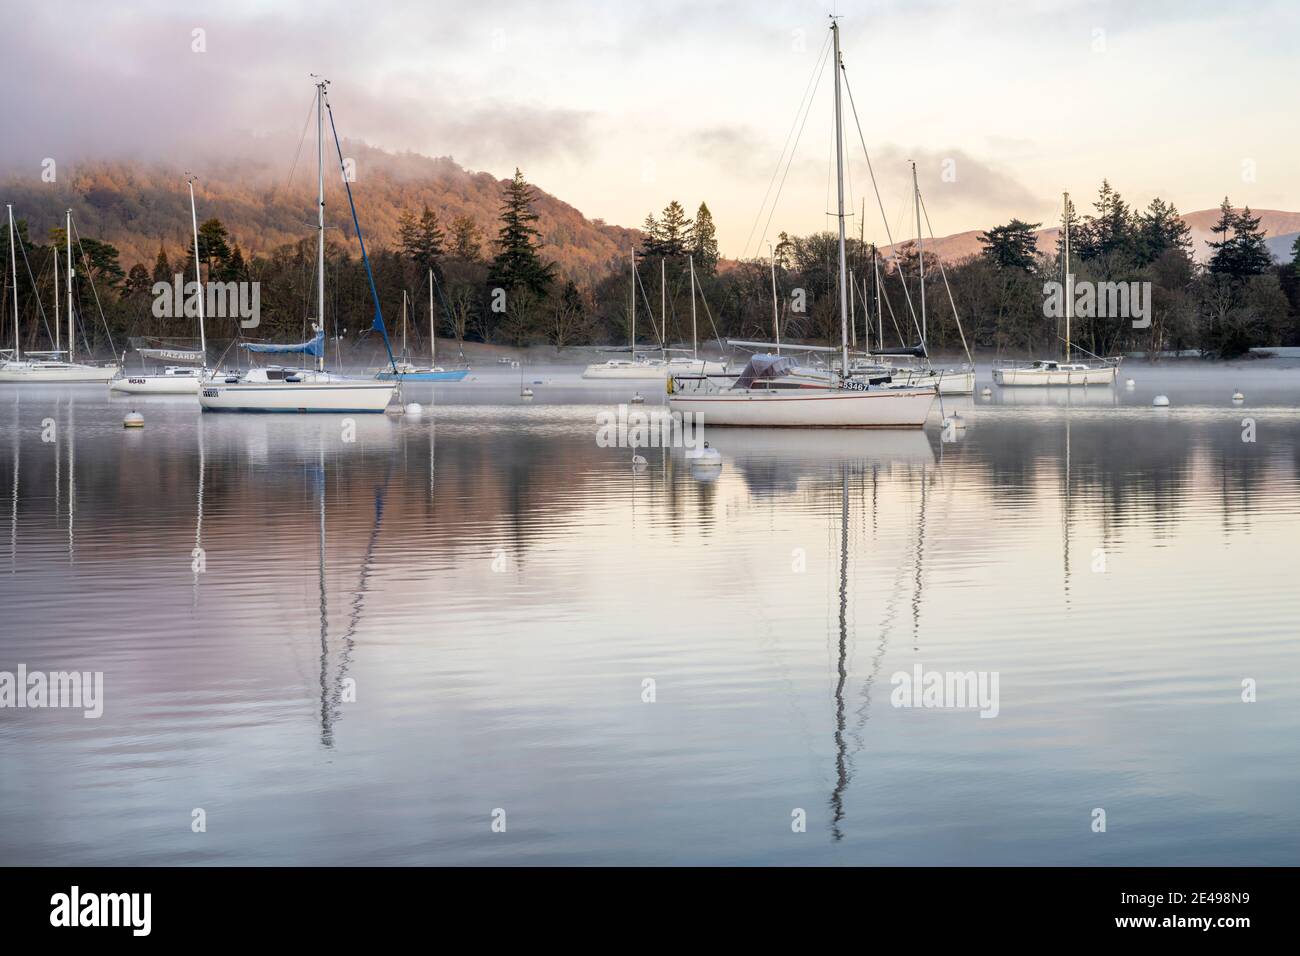 Yachts moored at Ferry nab on the banks of Lake Windermere Stock Photo